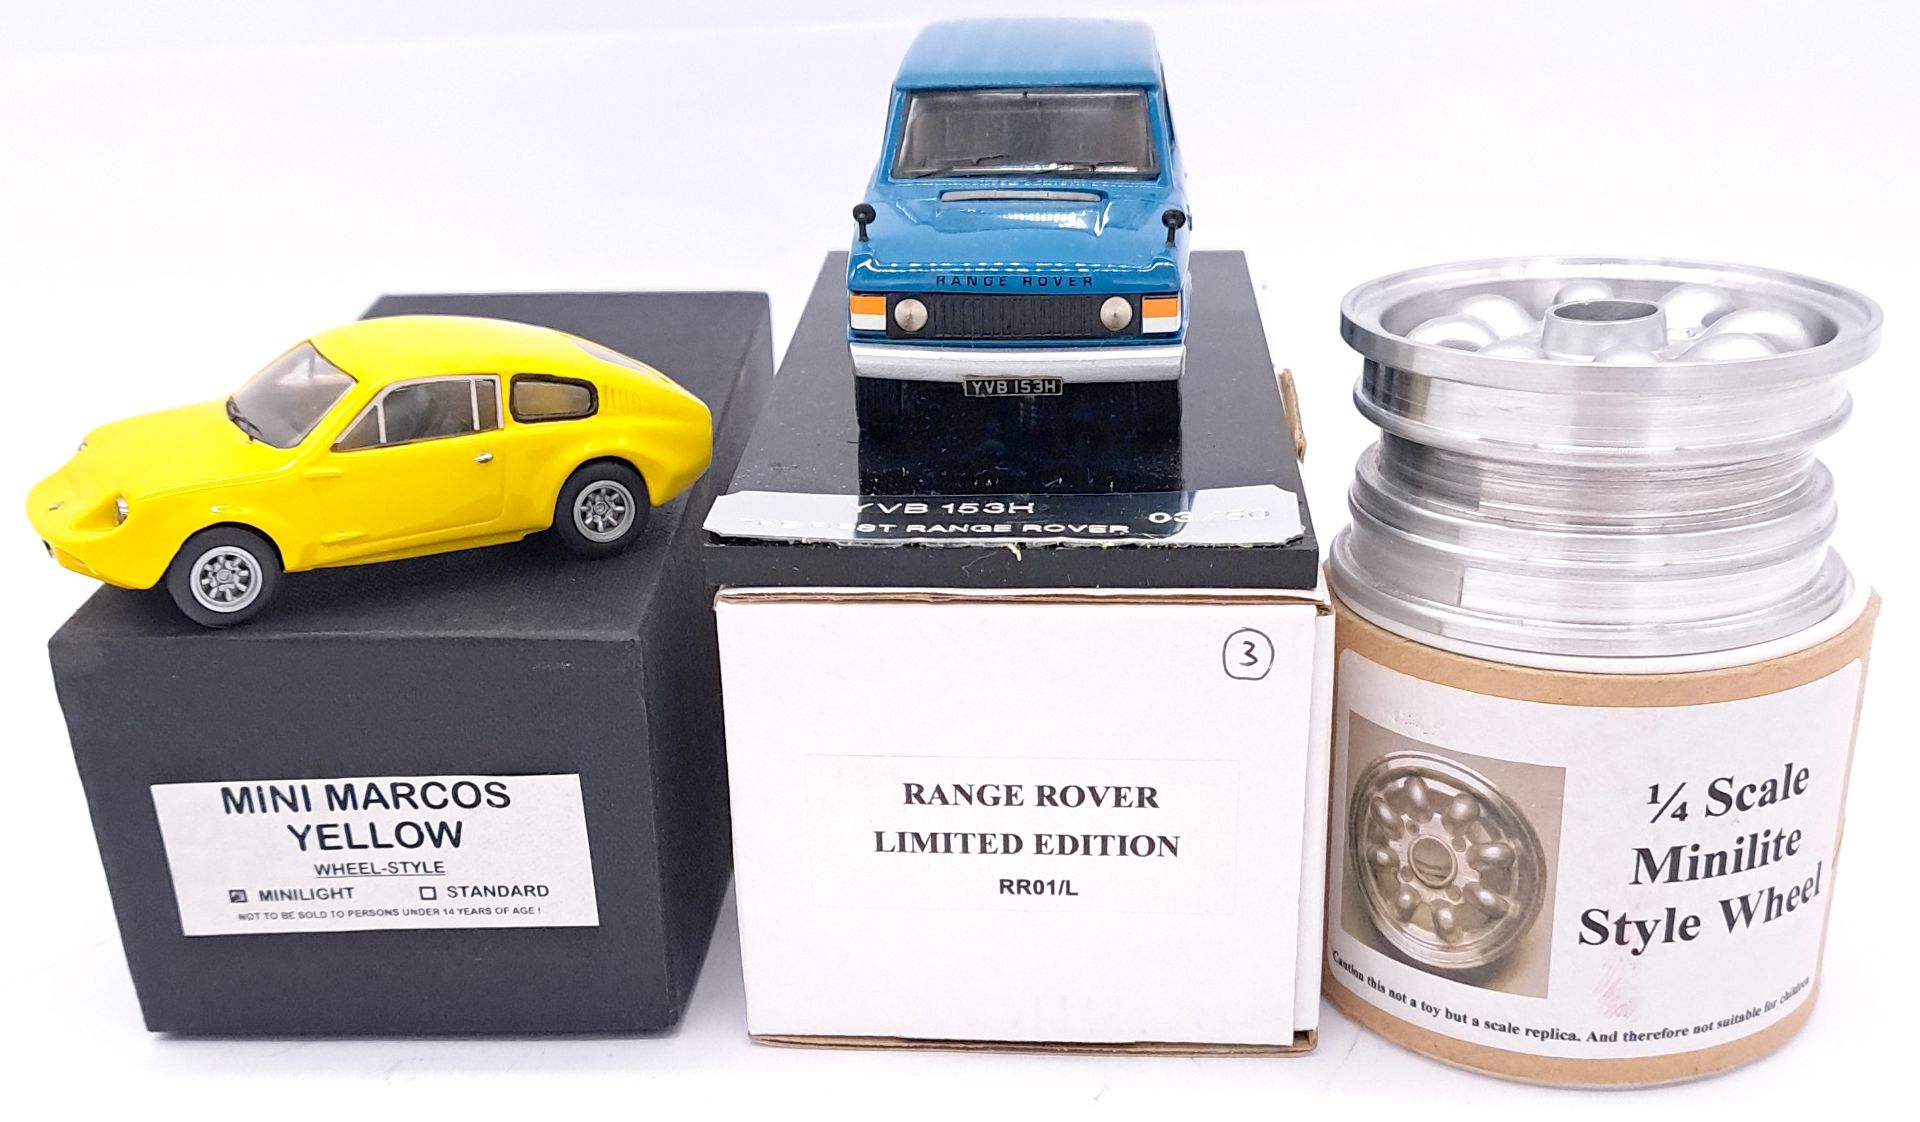 R.P.M. Models, a boxed white metal and resin group